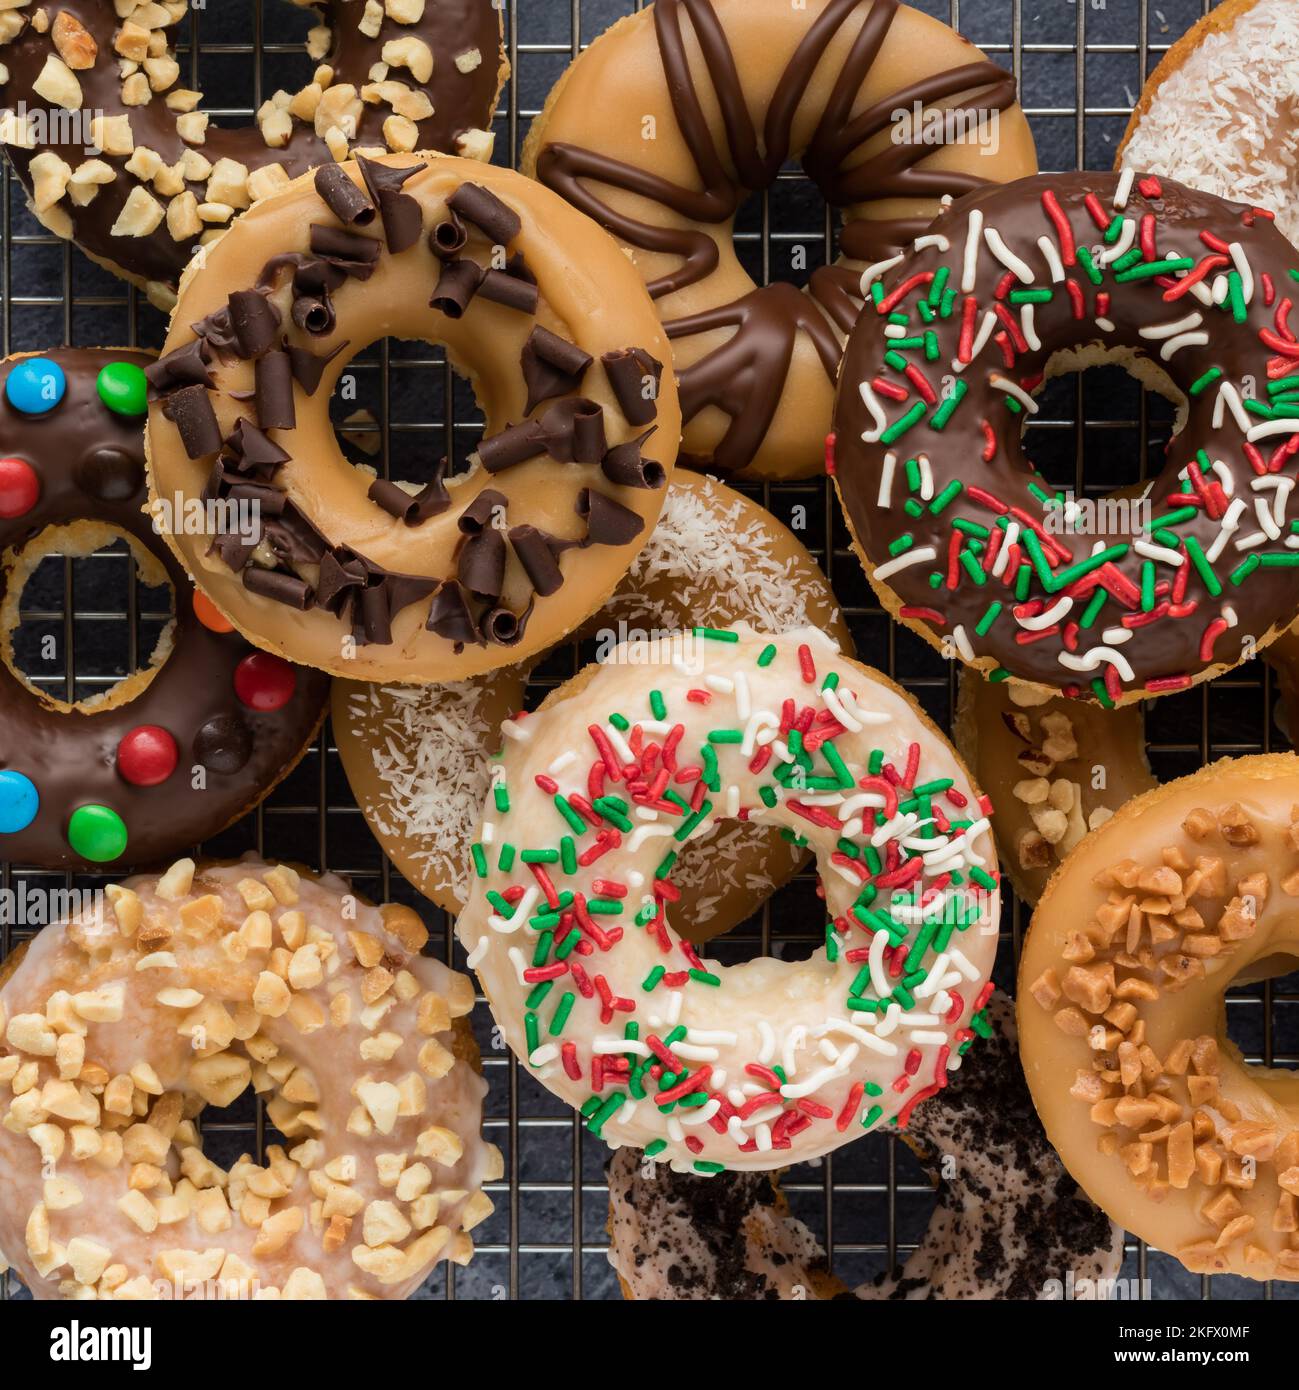 Top down view of a pile of fresh homemade donuts with various toppings. Stock Photo